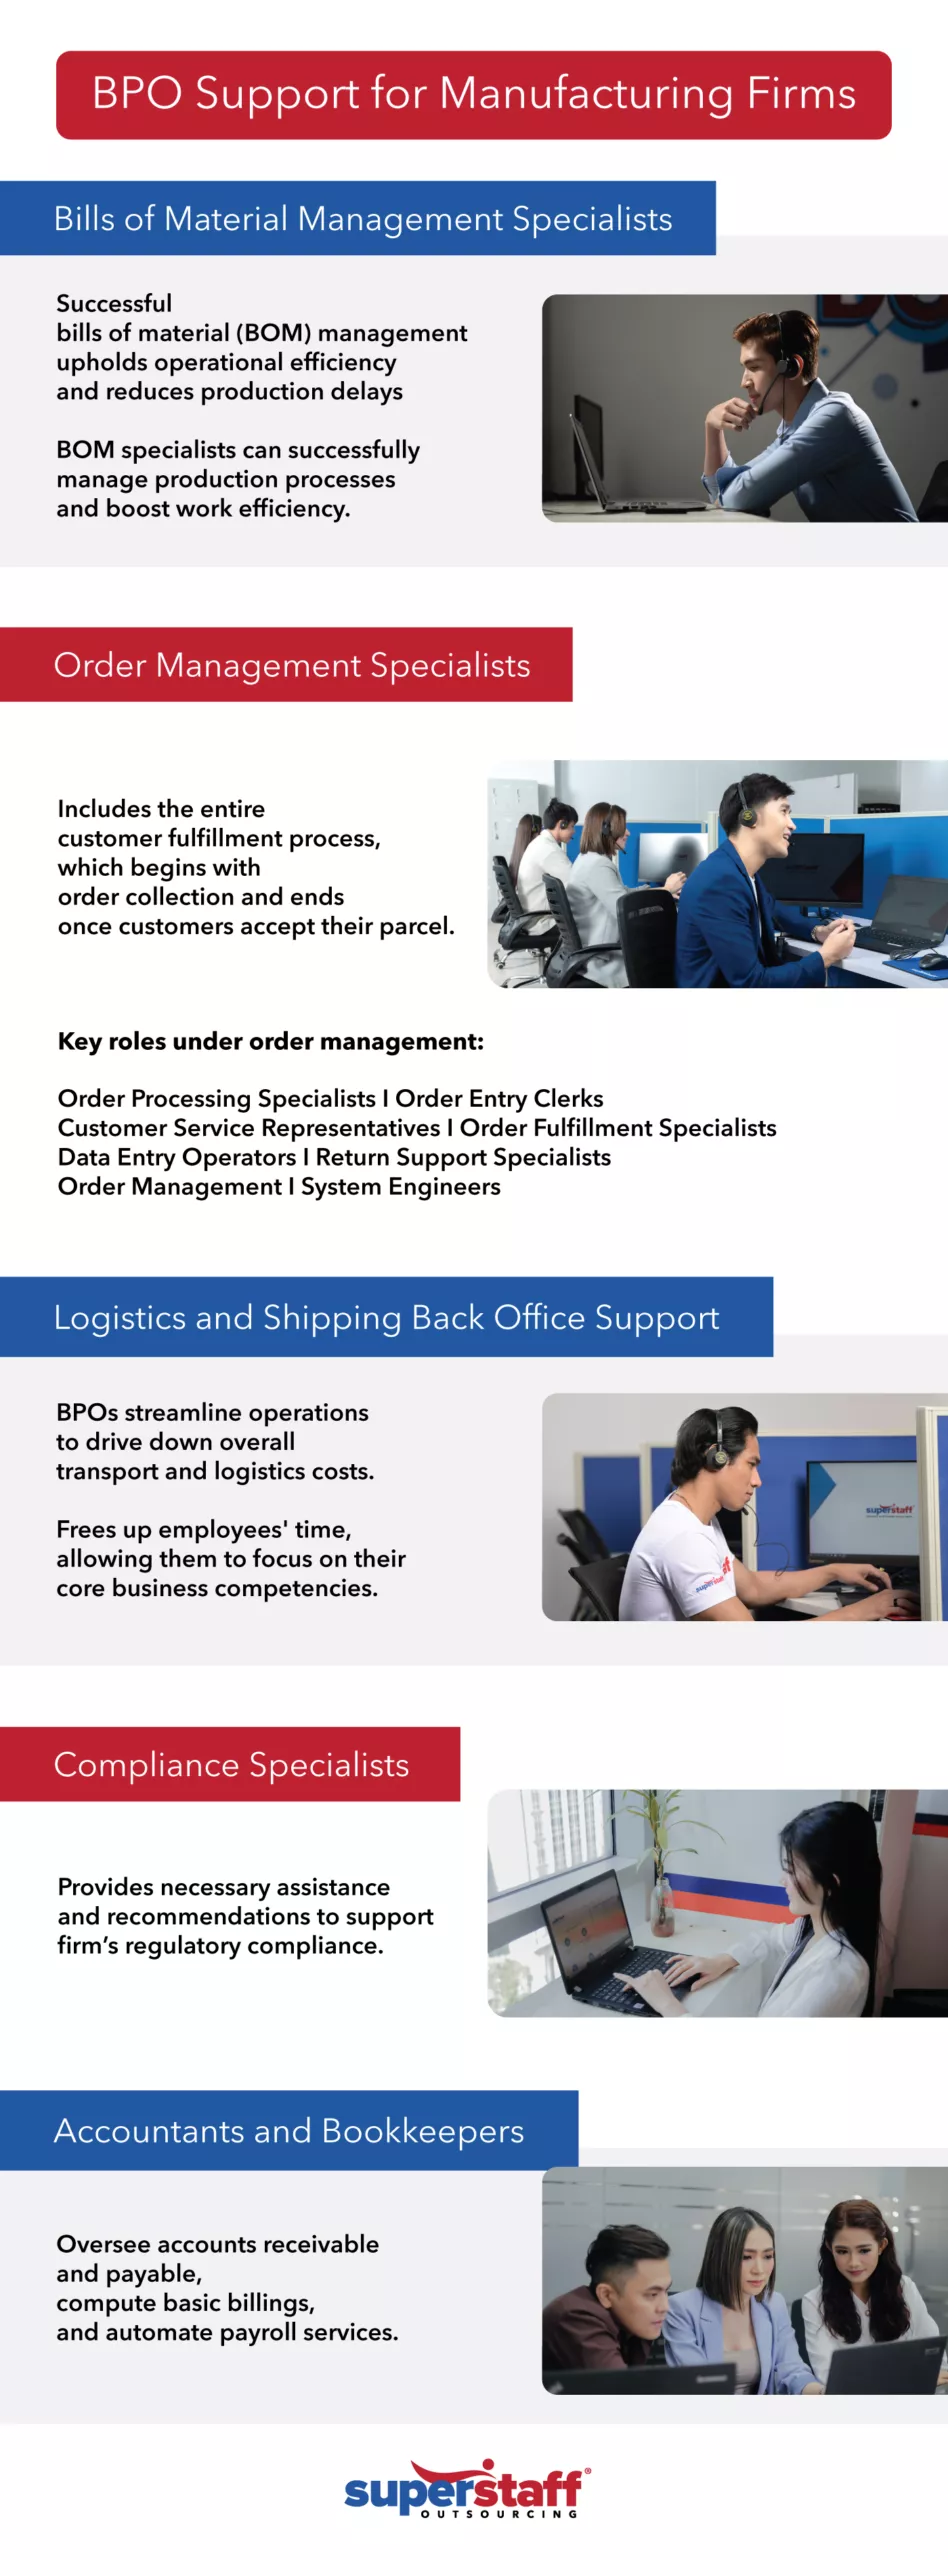 An infographic shows different BPO manufacturing solutions.